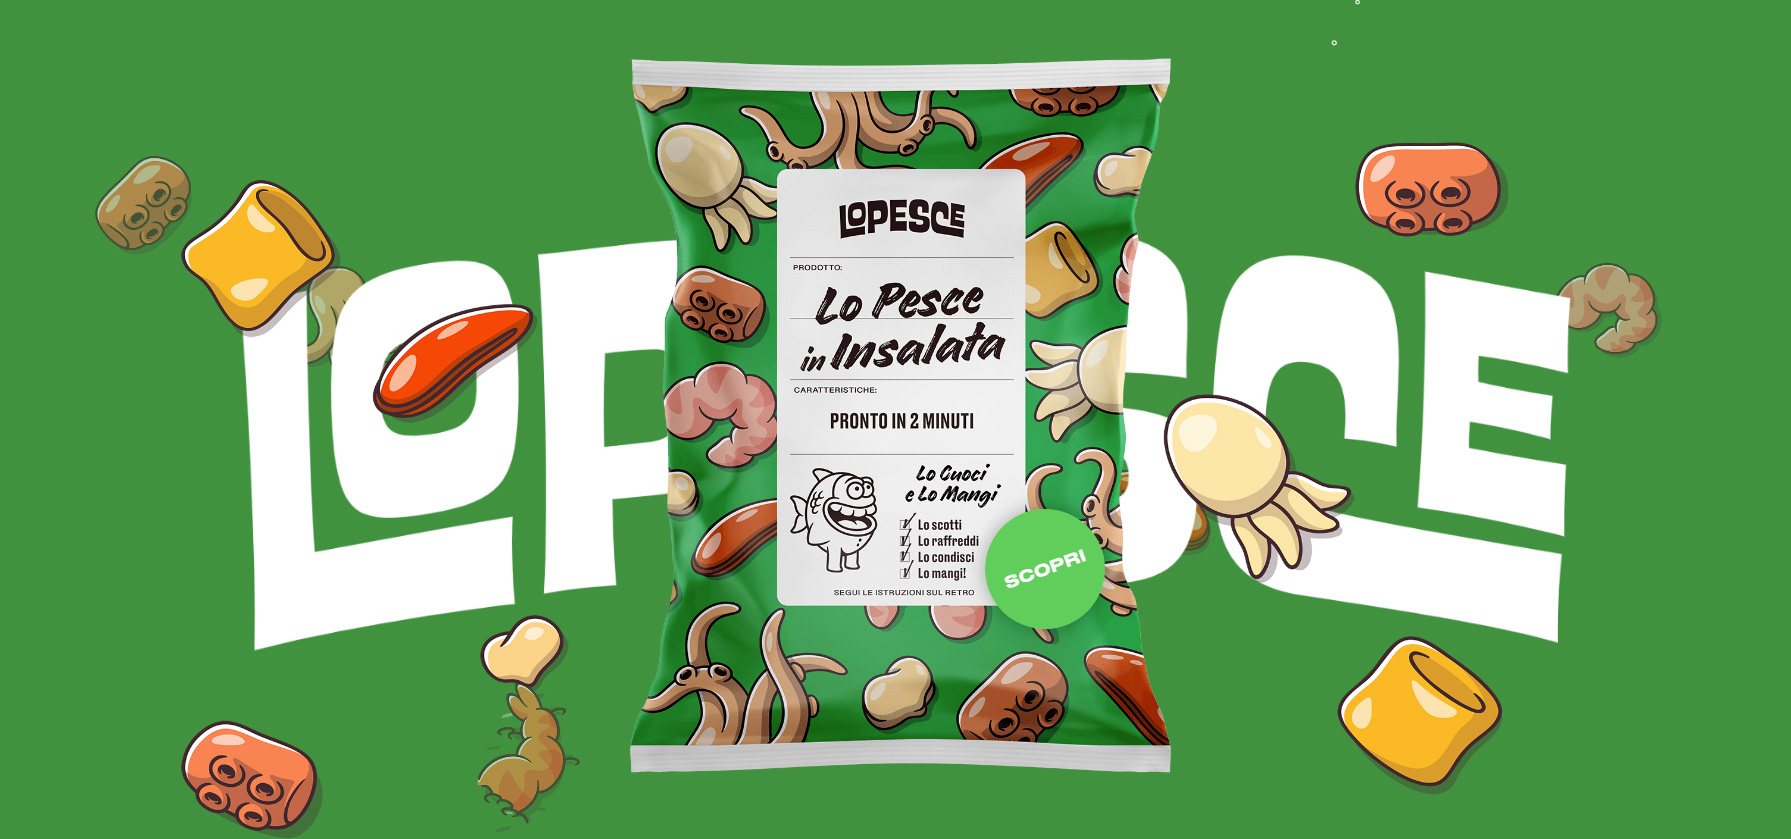 Lo Pesce - Website of the Day